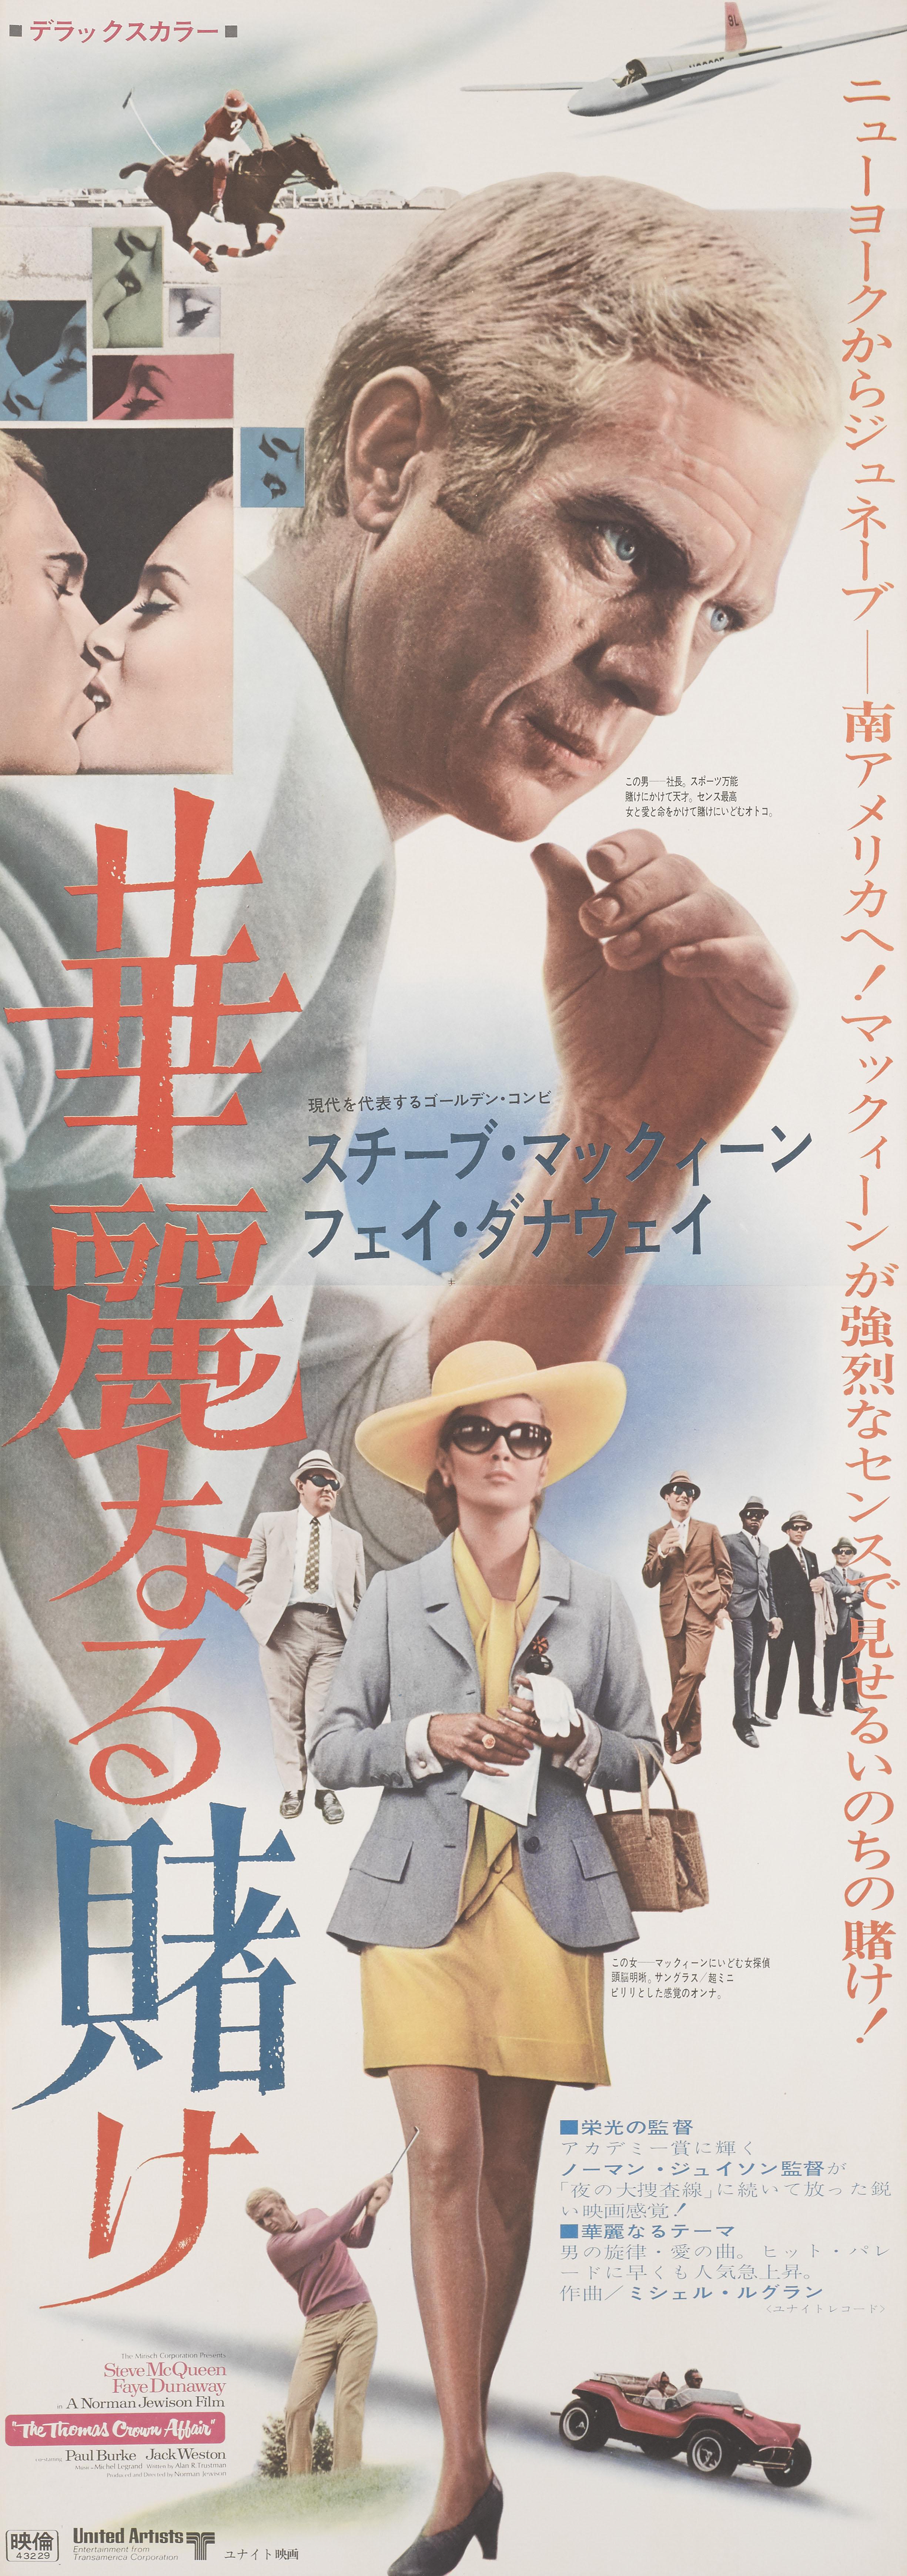 Original Japanese film poster for the 1968 romance, thriller directed by Norman Jewison and staring Steve McQueen and Faye.
This poster is the rare larger size Japanese and was printed in two pieces. This poster is unfolded and conservation linen